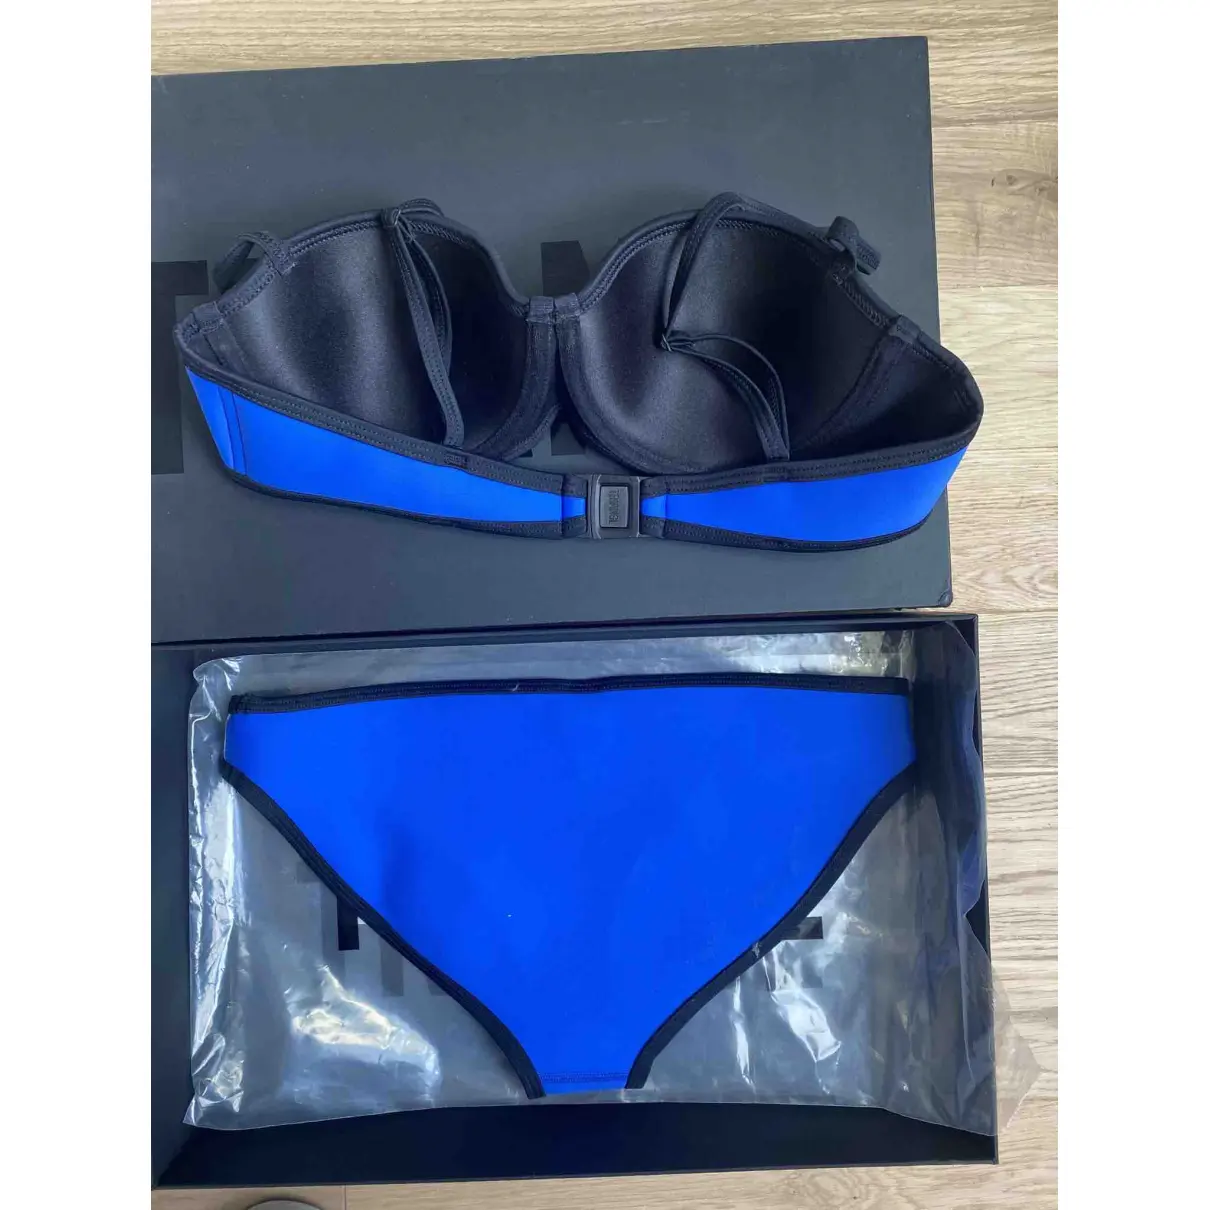 Buy Triangl Two-piece swimsuit online